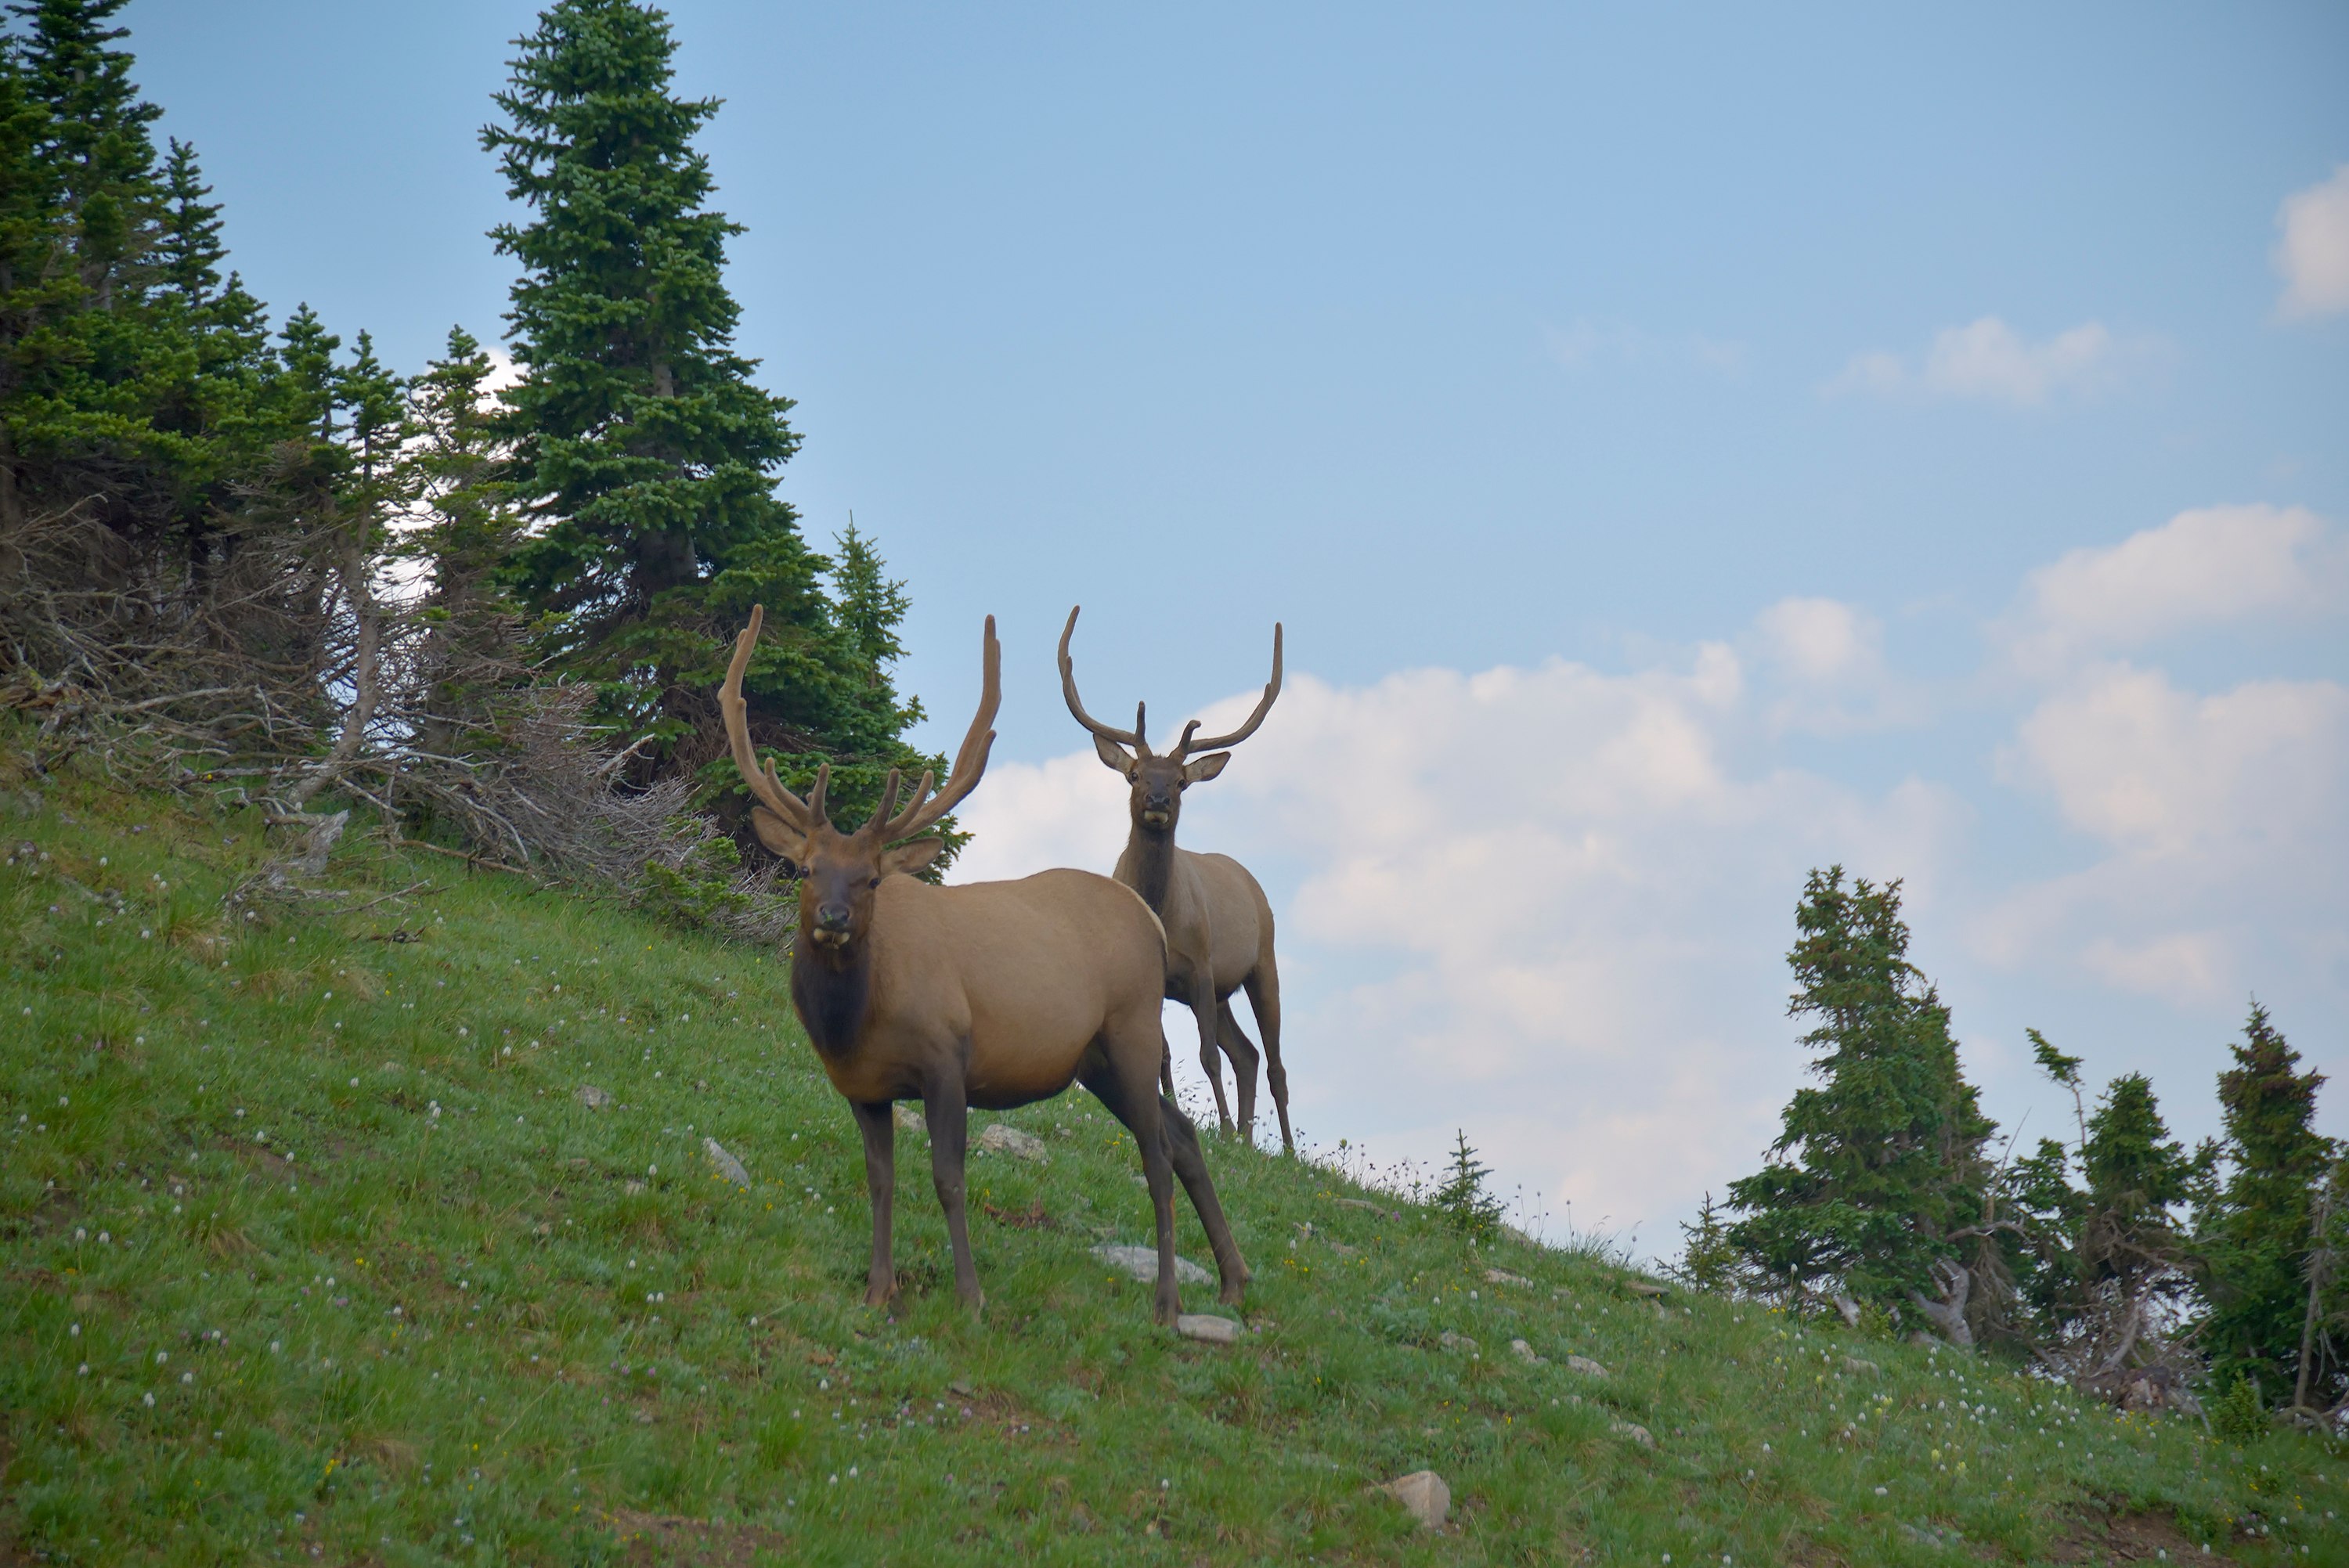 
        <div class='title'>
          Elk on the Mount Ida Trail
        </div>
       
        <div class='description'>
          Two Bull Elk look up from their breakfast along the trail
        </div>
      